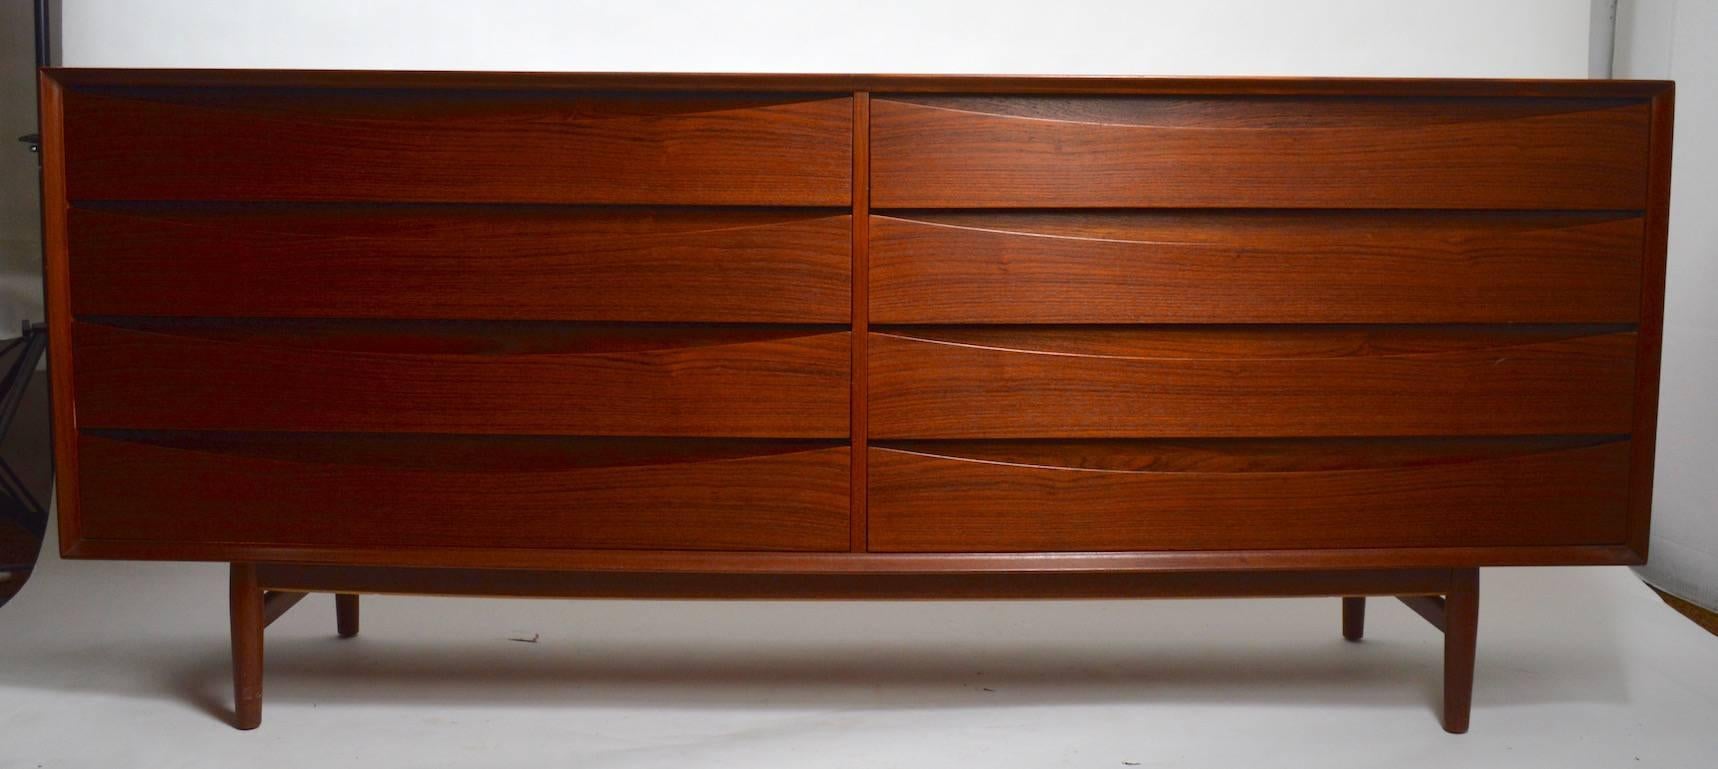 Nice teak Danish modern double dresser designed by Arne Vodder for Sibast. 
 This example is in very good, original condition, there is a very slight loss to one drawer front corner, and minor cosmetic wear, normal and consistent with age. Clean,